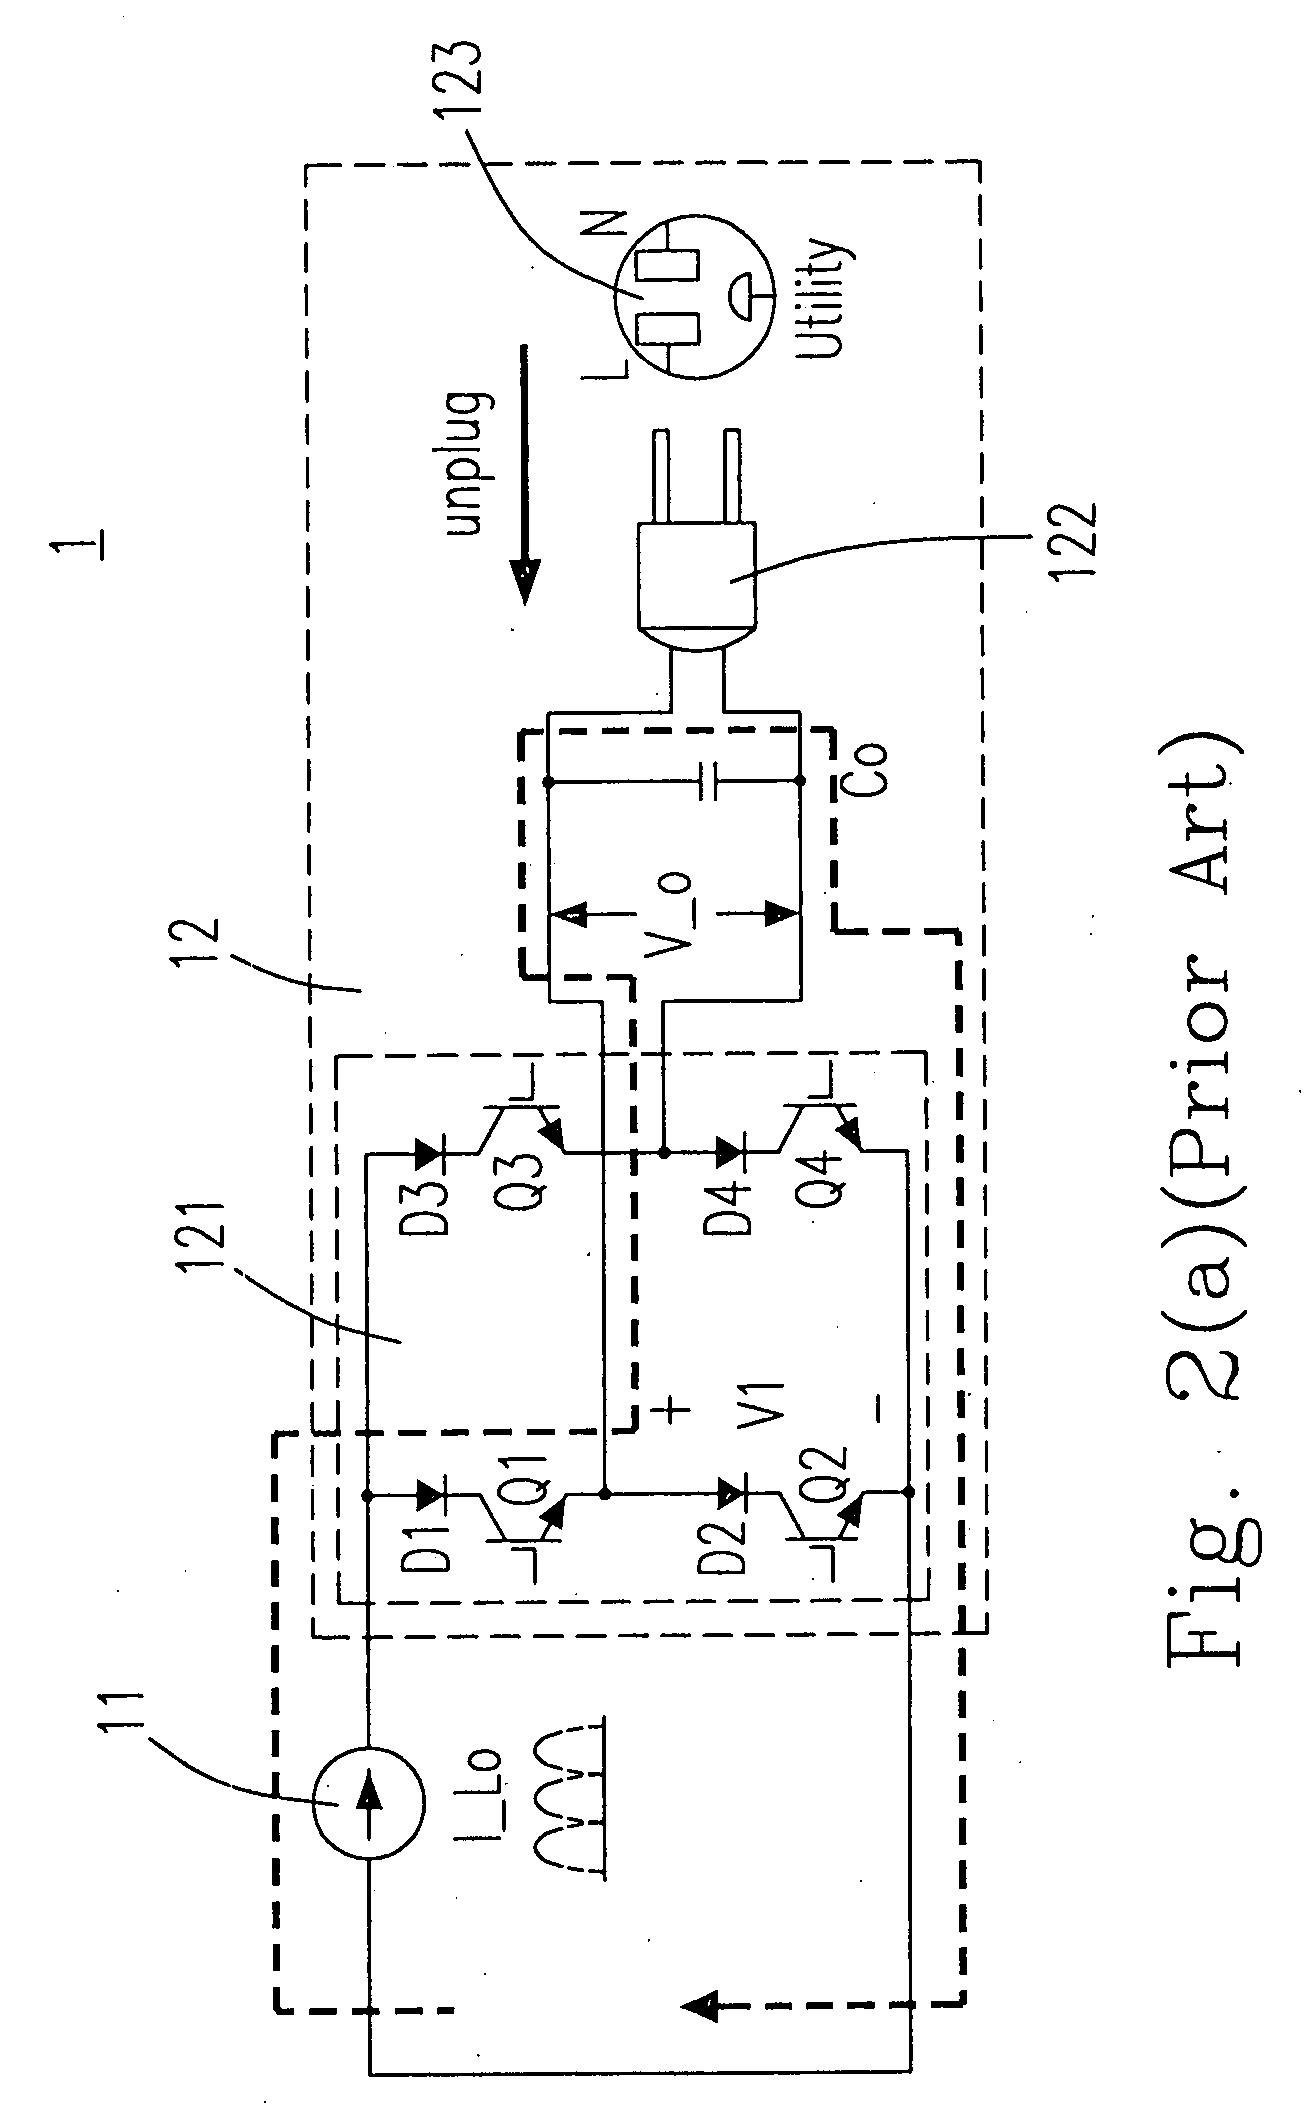 Current source inverter with energy clamp circuit and controlling method thereof having relatively better effectiveness